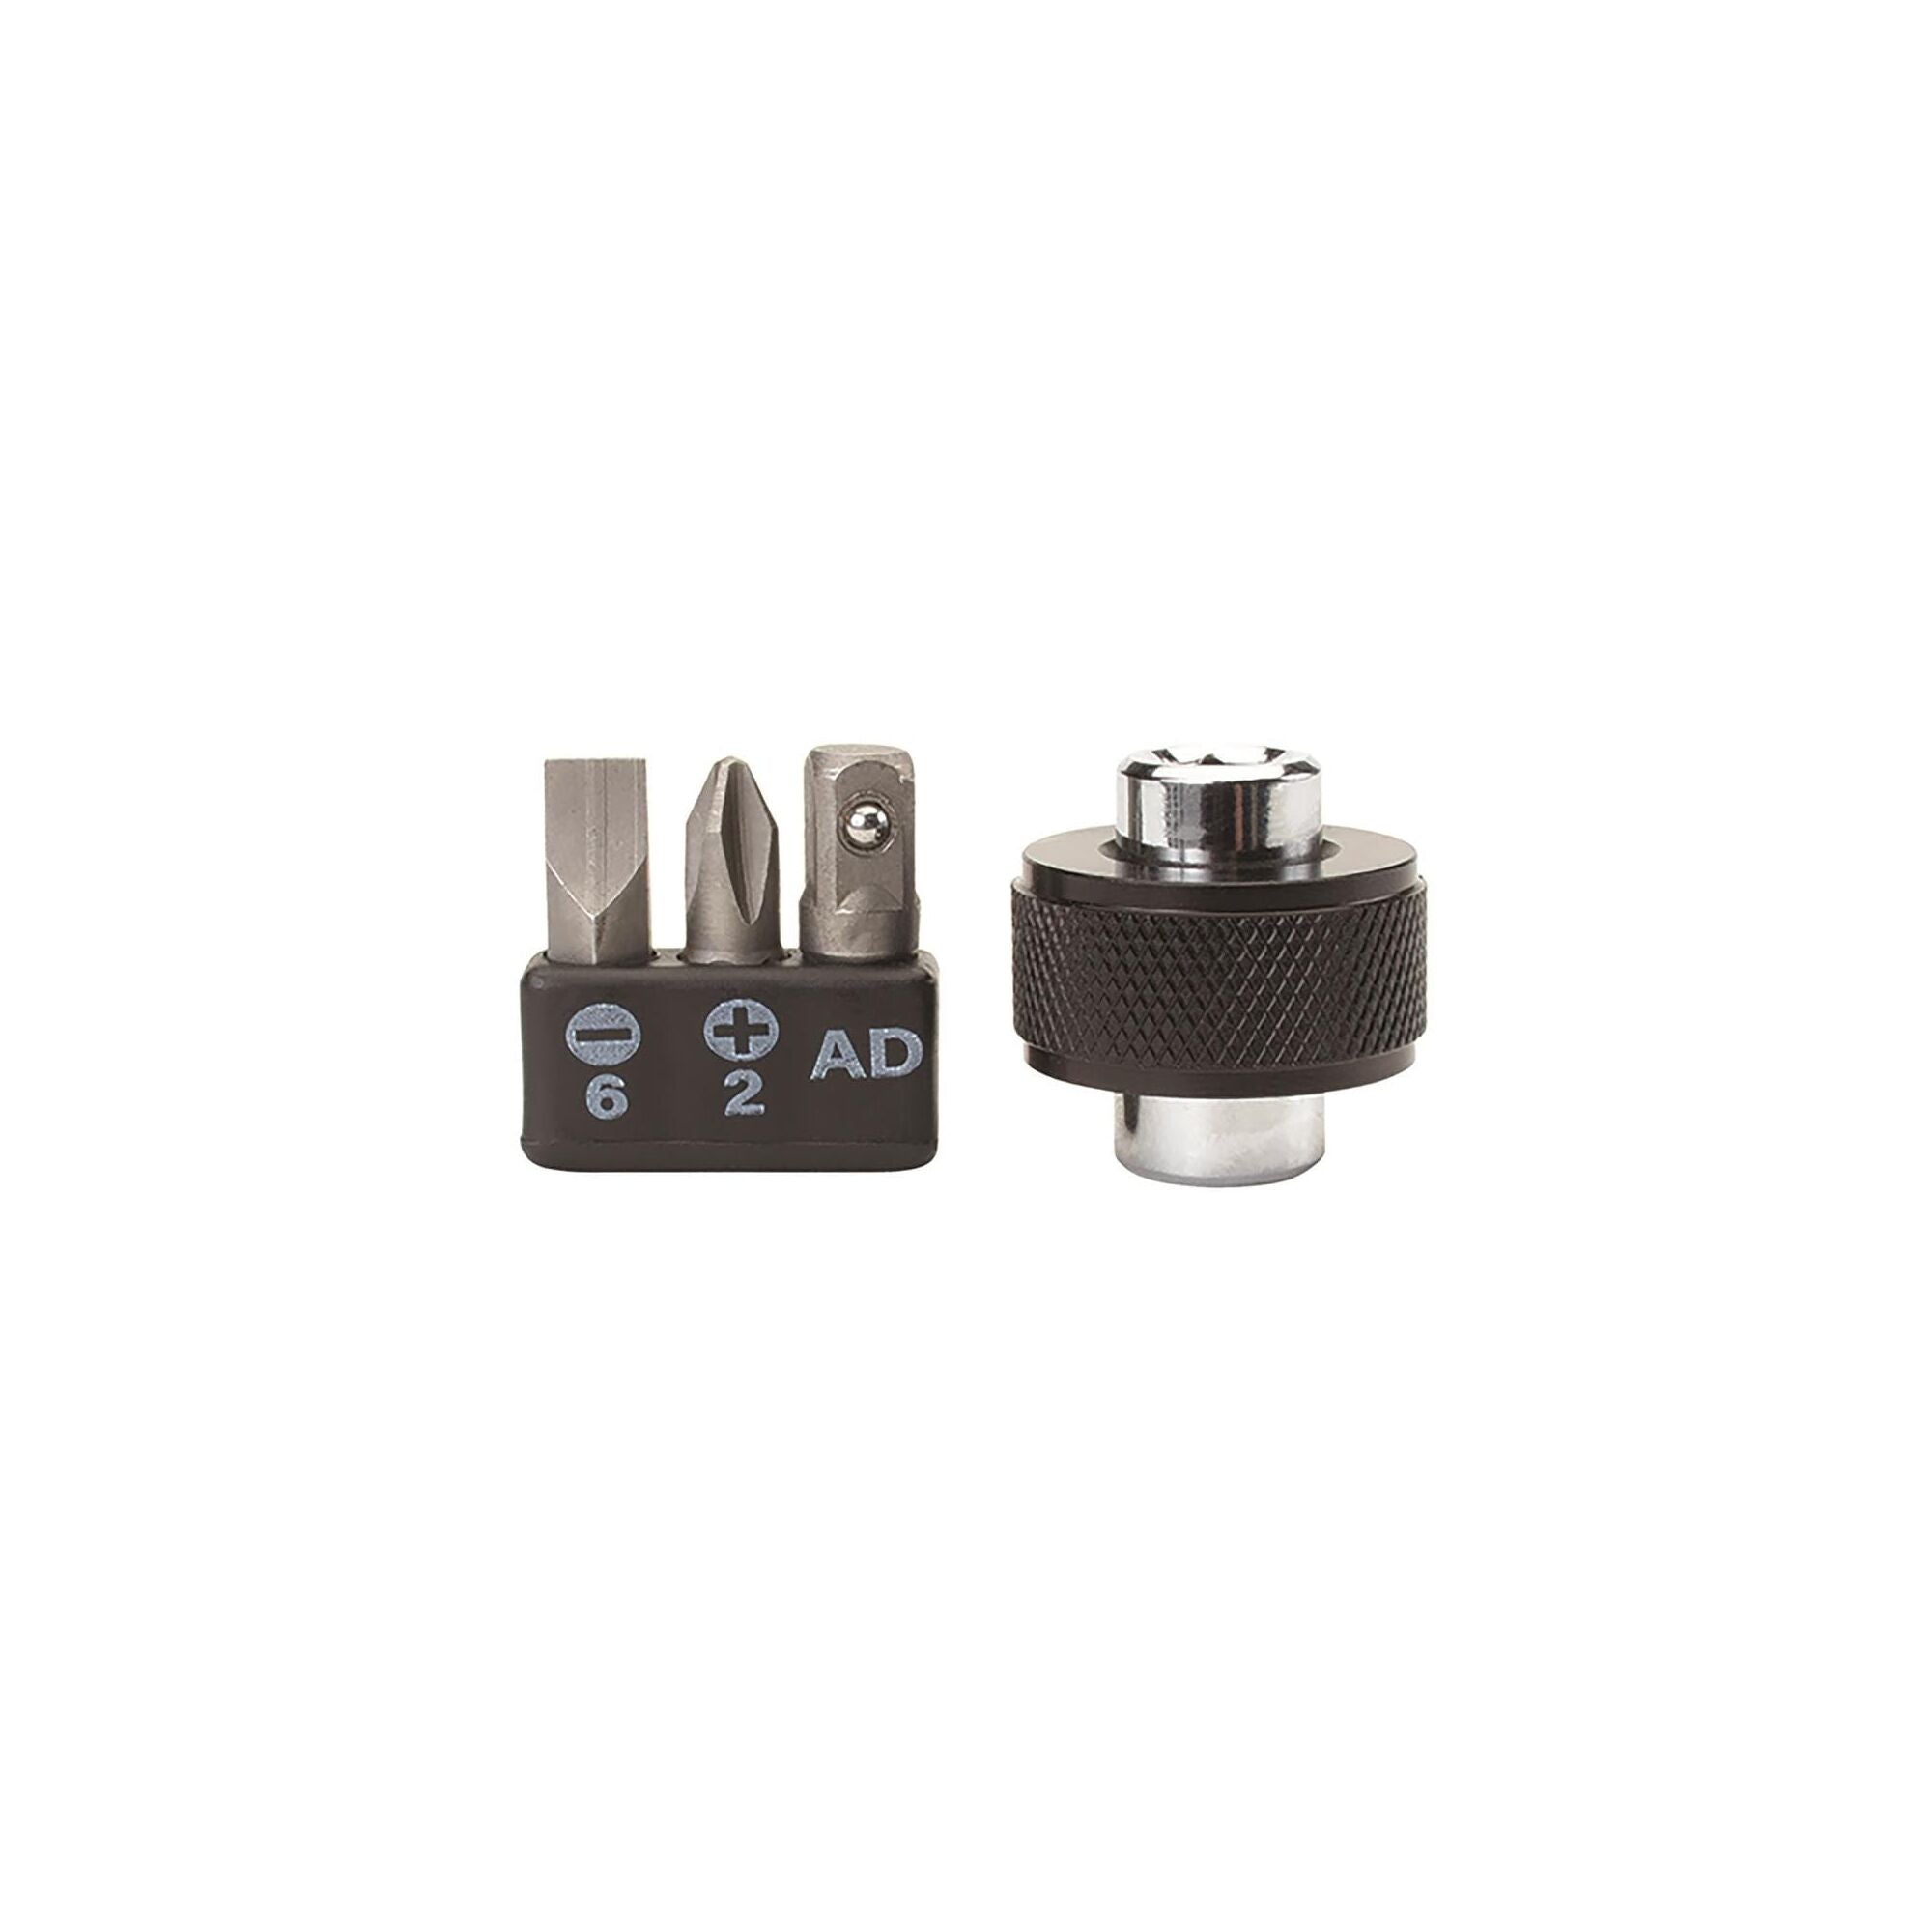 View of CRAFTSMAN Accessories: Nut Drivers on white background